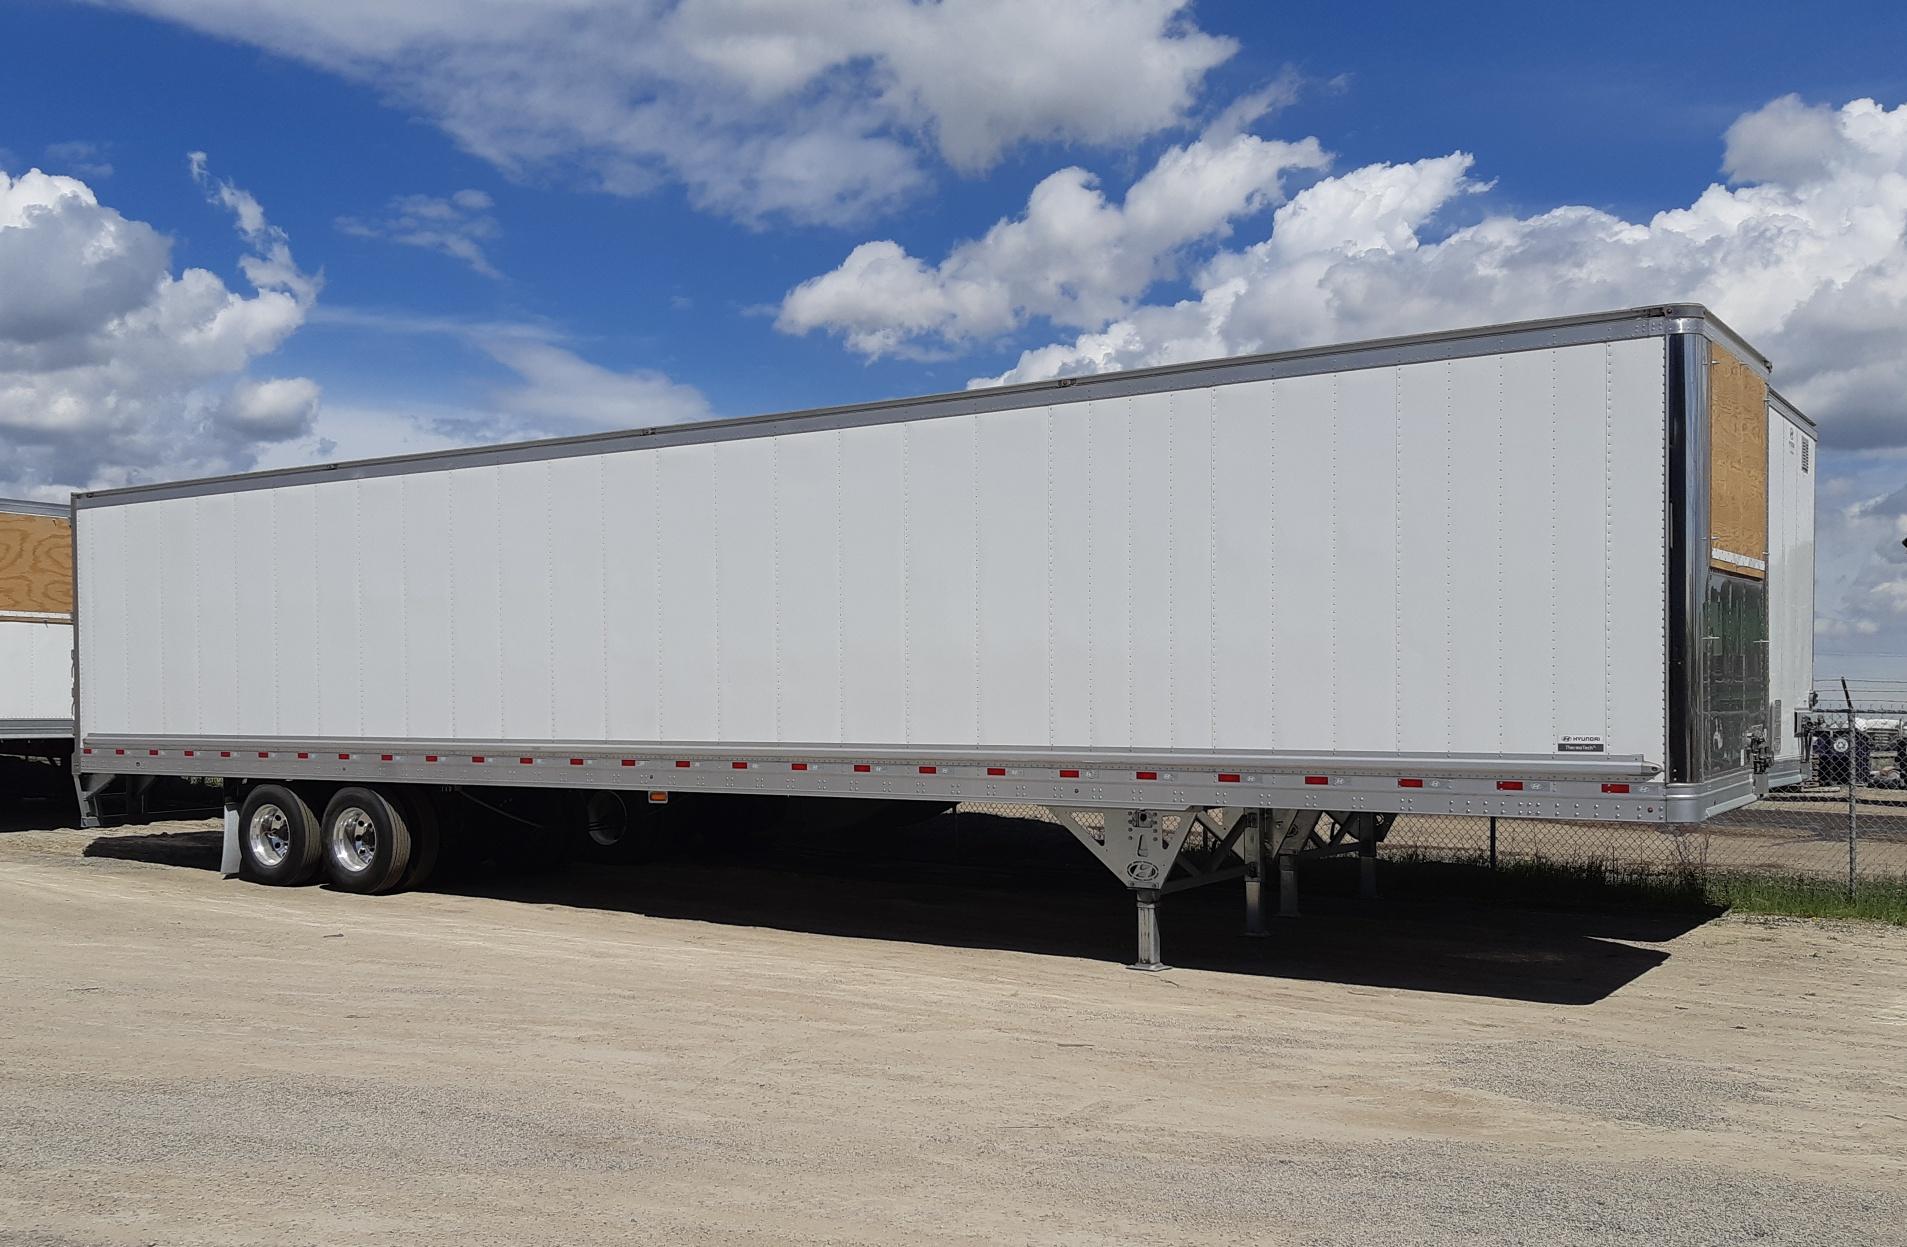 What Are The Benefits of Transporting With Enclosed Trailers